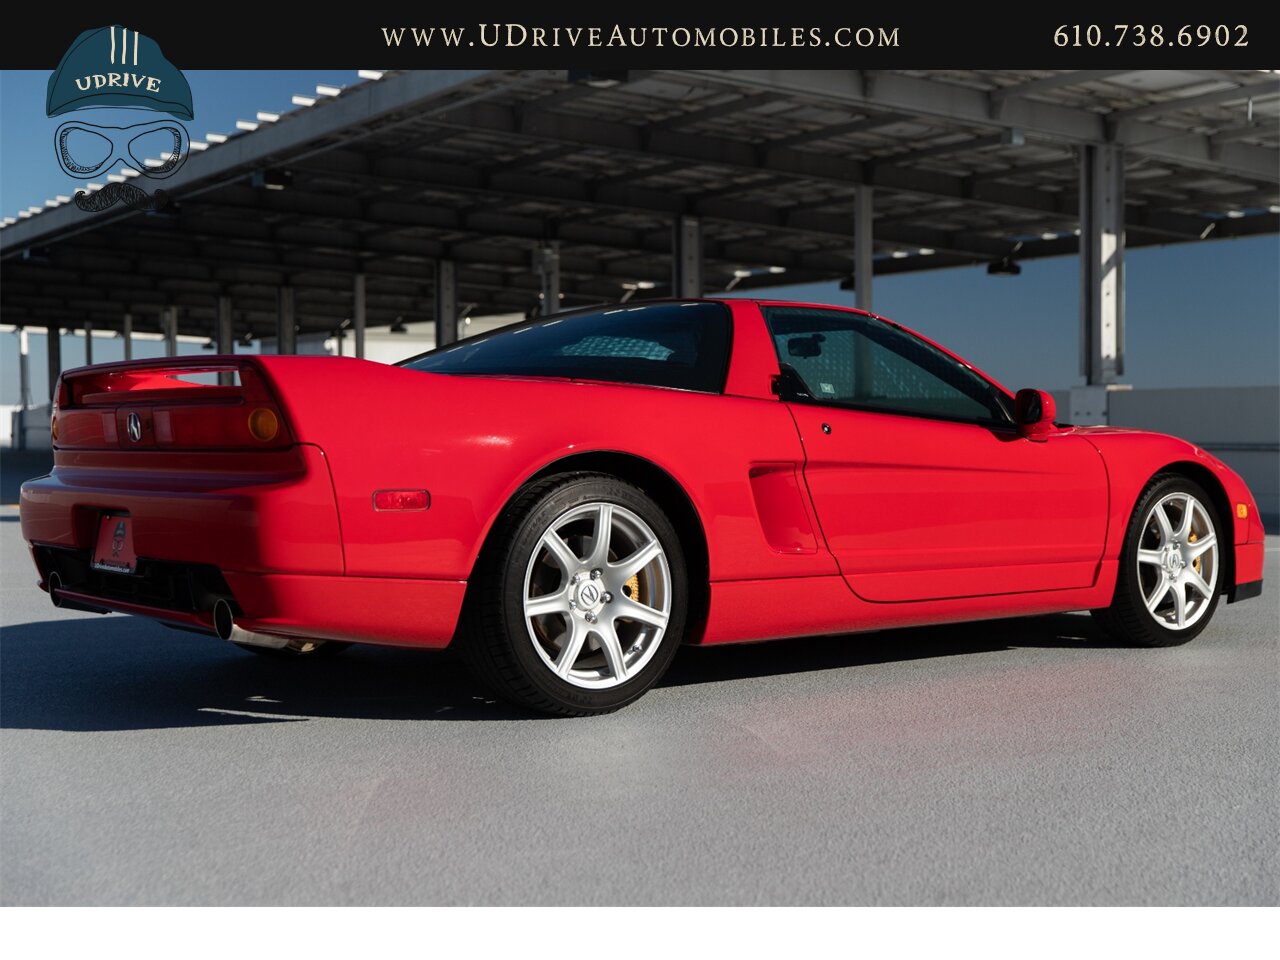 2004 Acura NSX NSX-T 21k mIles Red over Black  Fresh Timing Belt Service - Photo 3 - West Chester, PA 19382